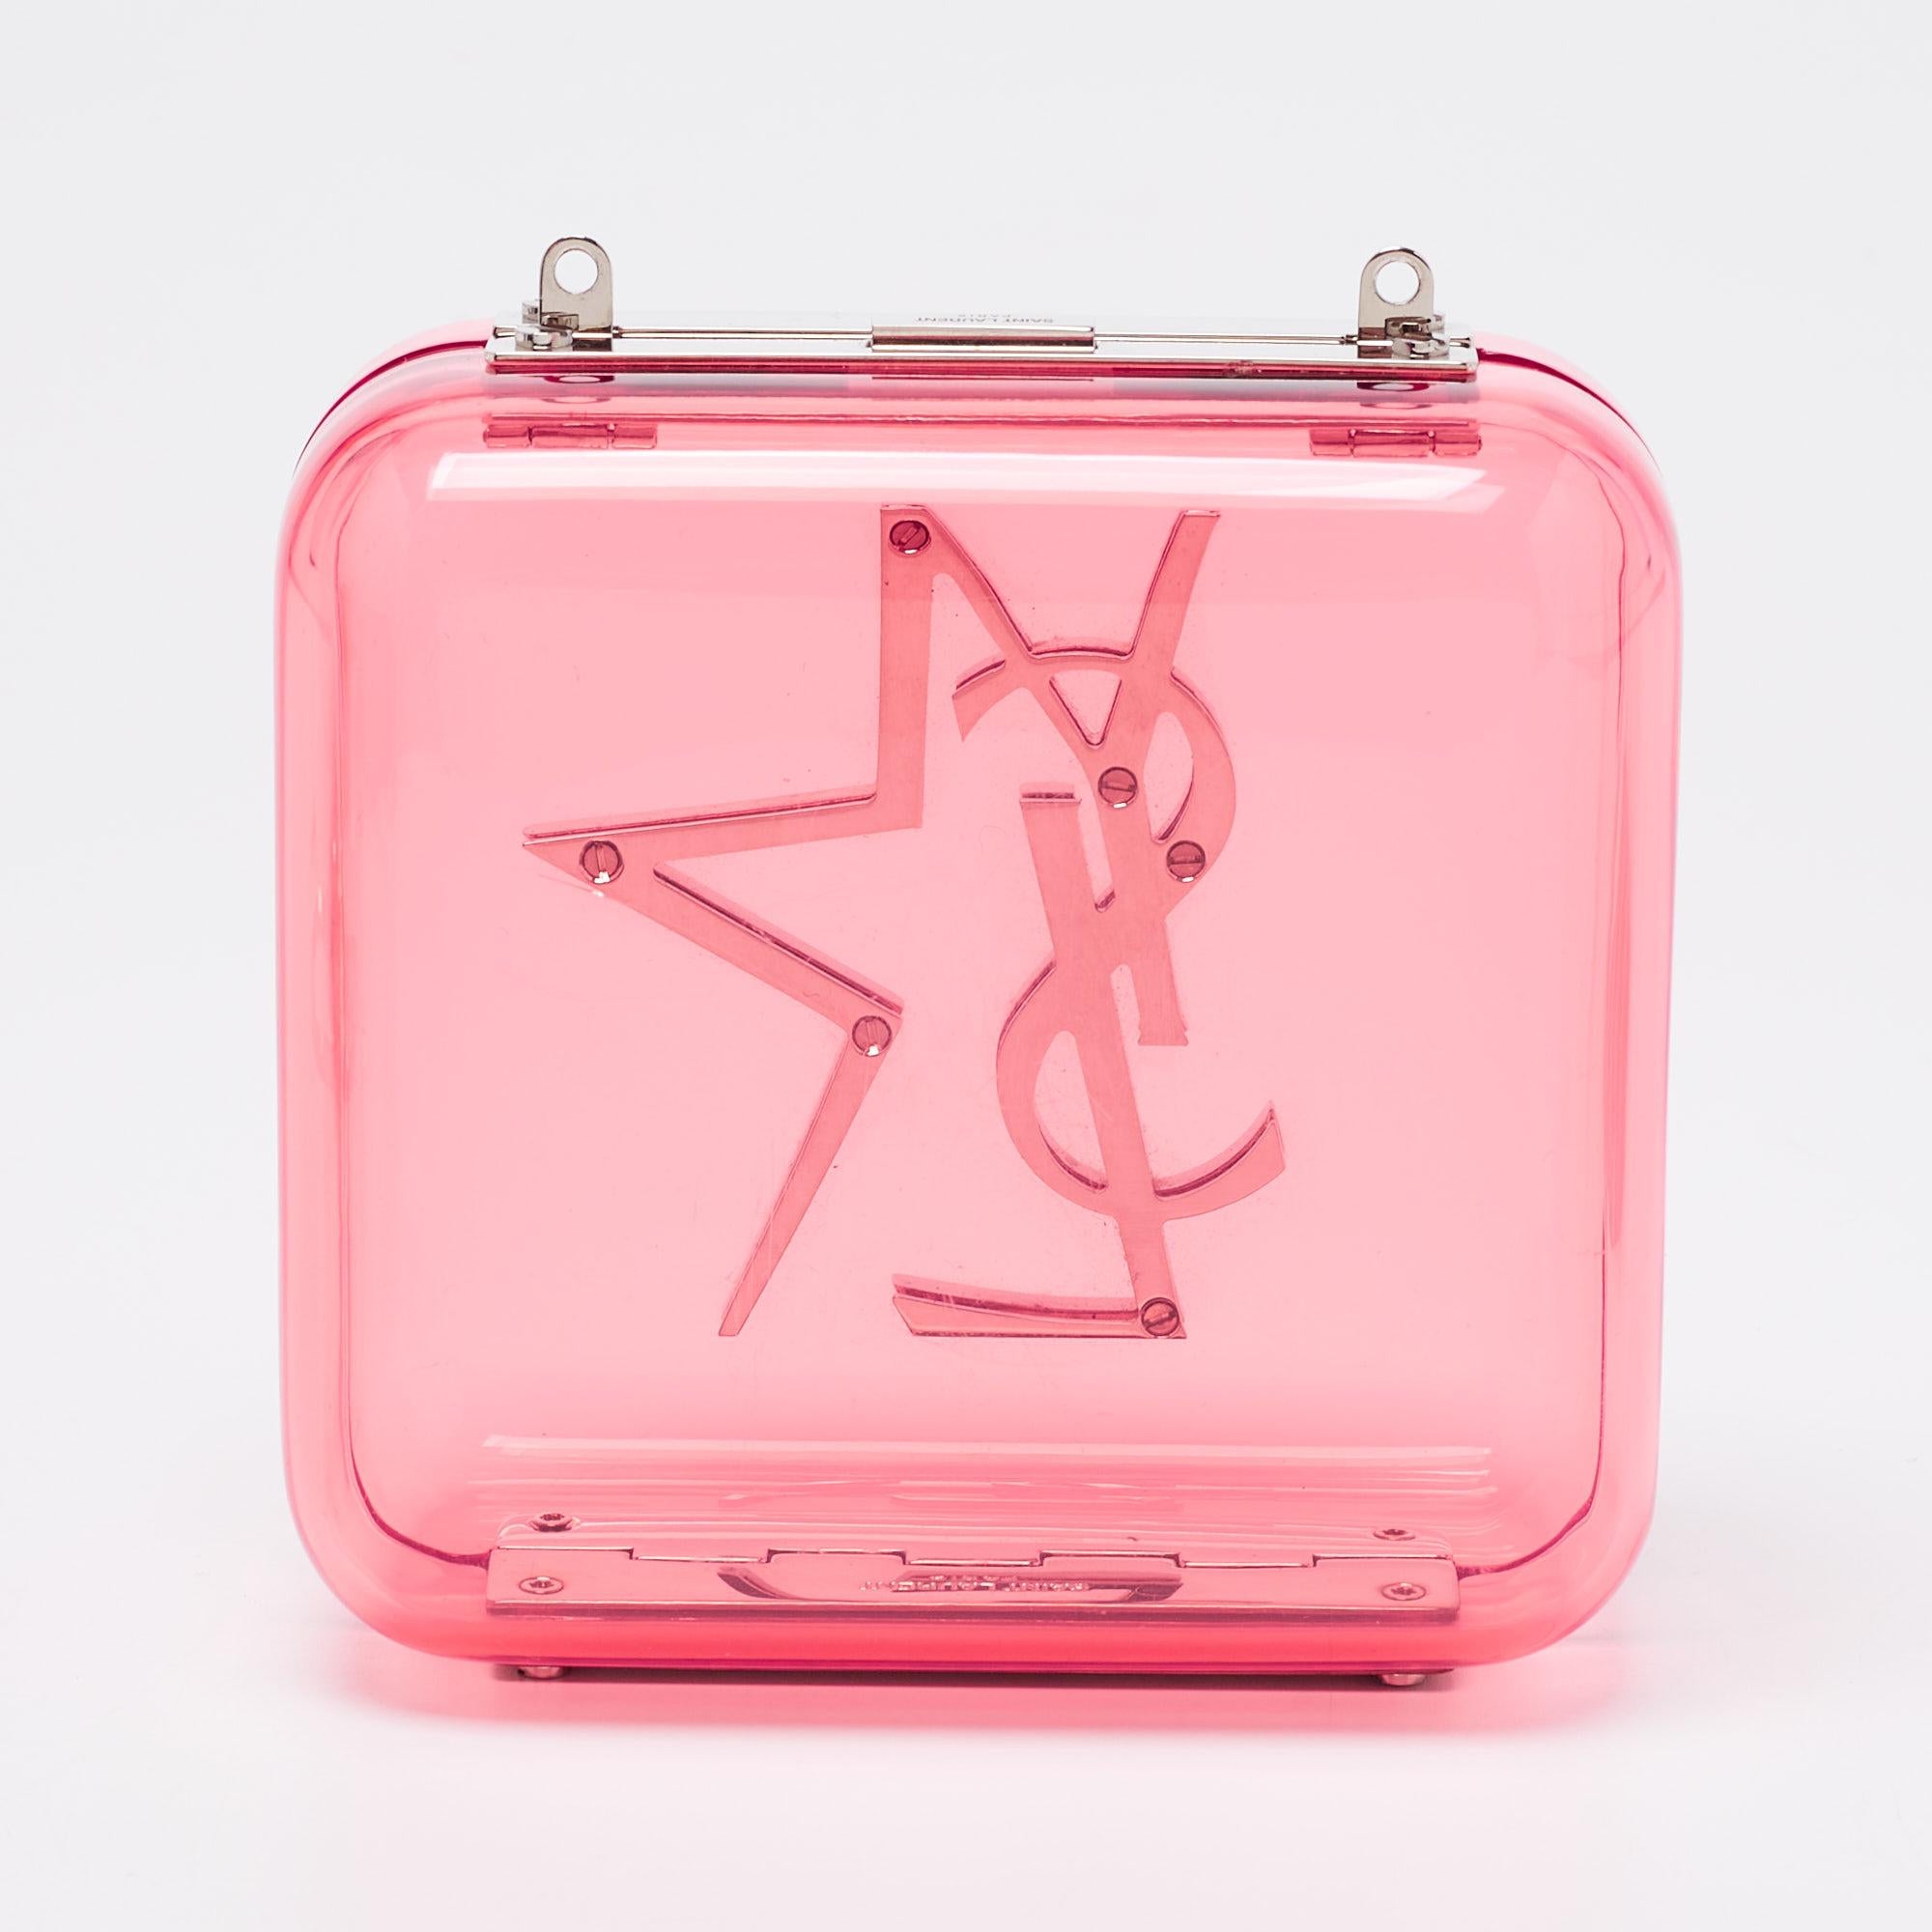 Make this Saint Laurent clutch the star of your outfit. Made of plexiglass, it has see-through look with the YSL logo on the front and an attached chain for hand, shoulder, and crossbody carry styles. It can easily complement a fashionable suit or a